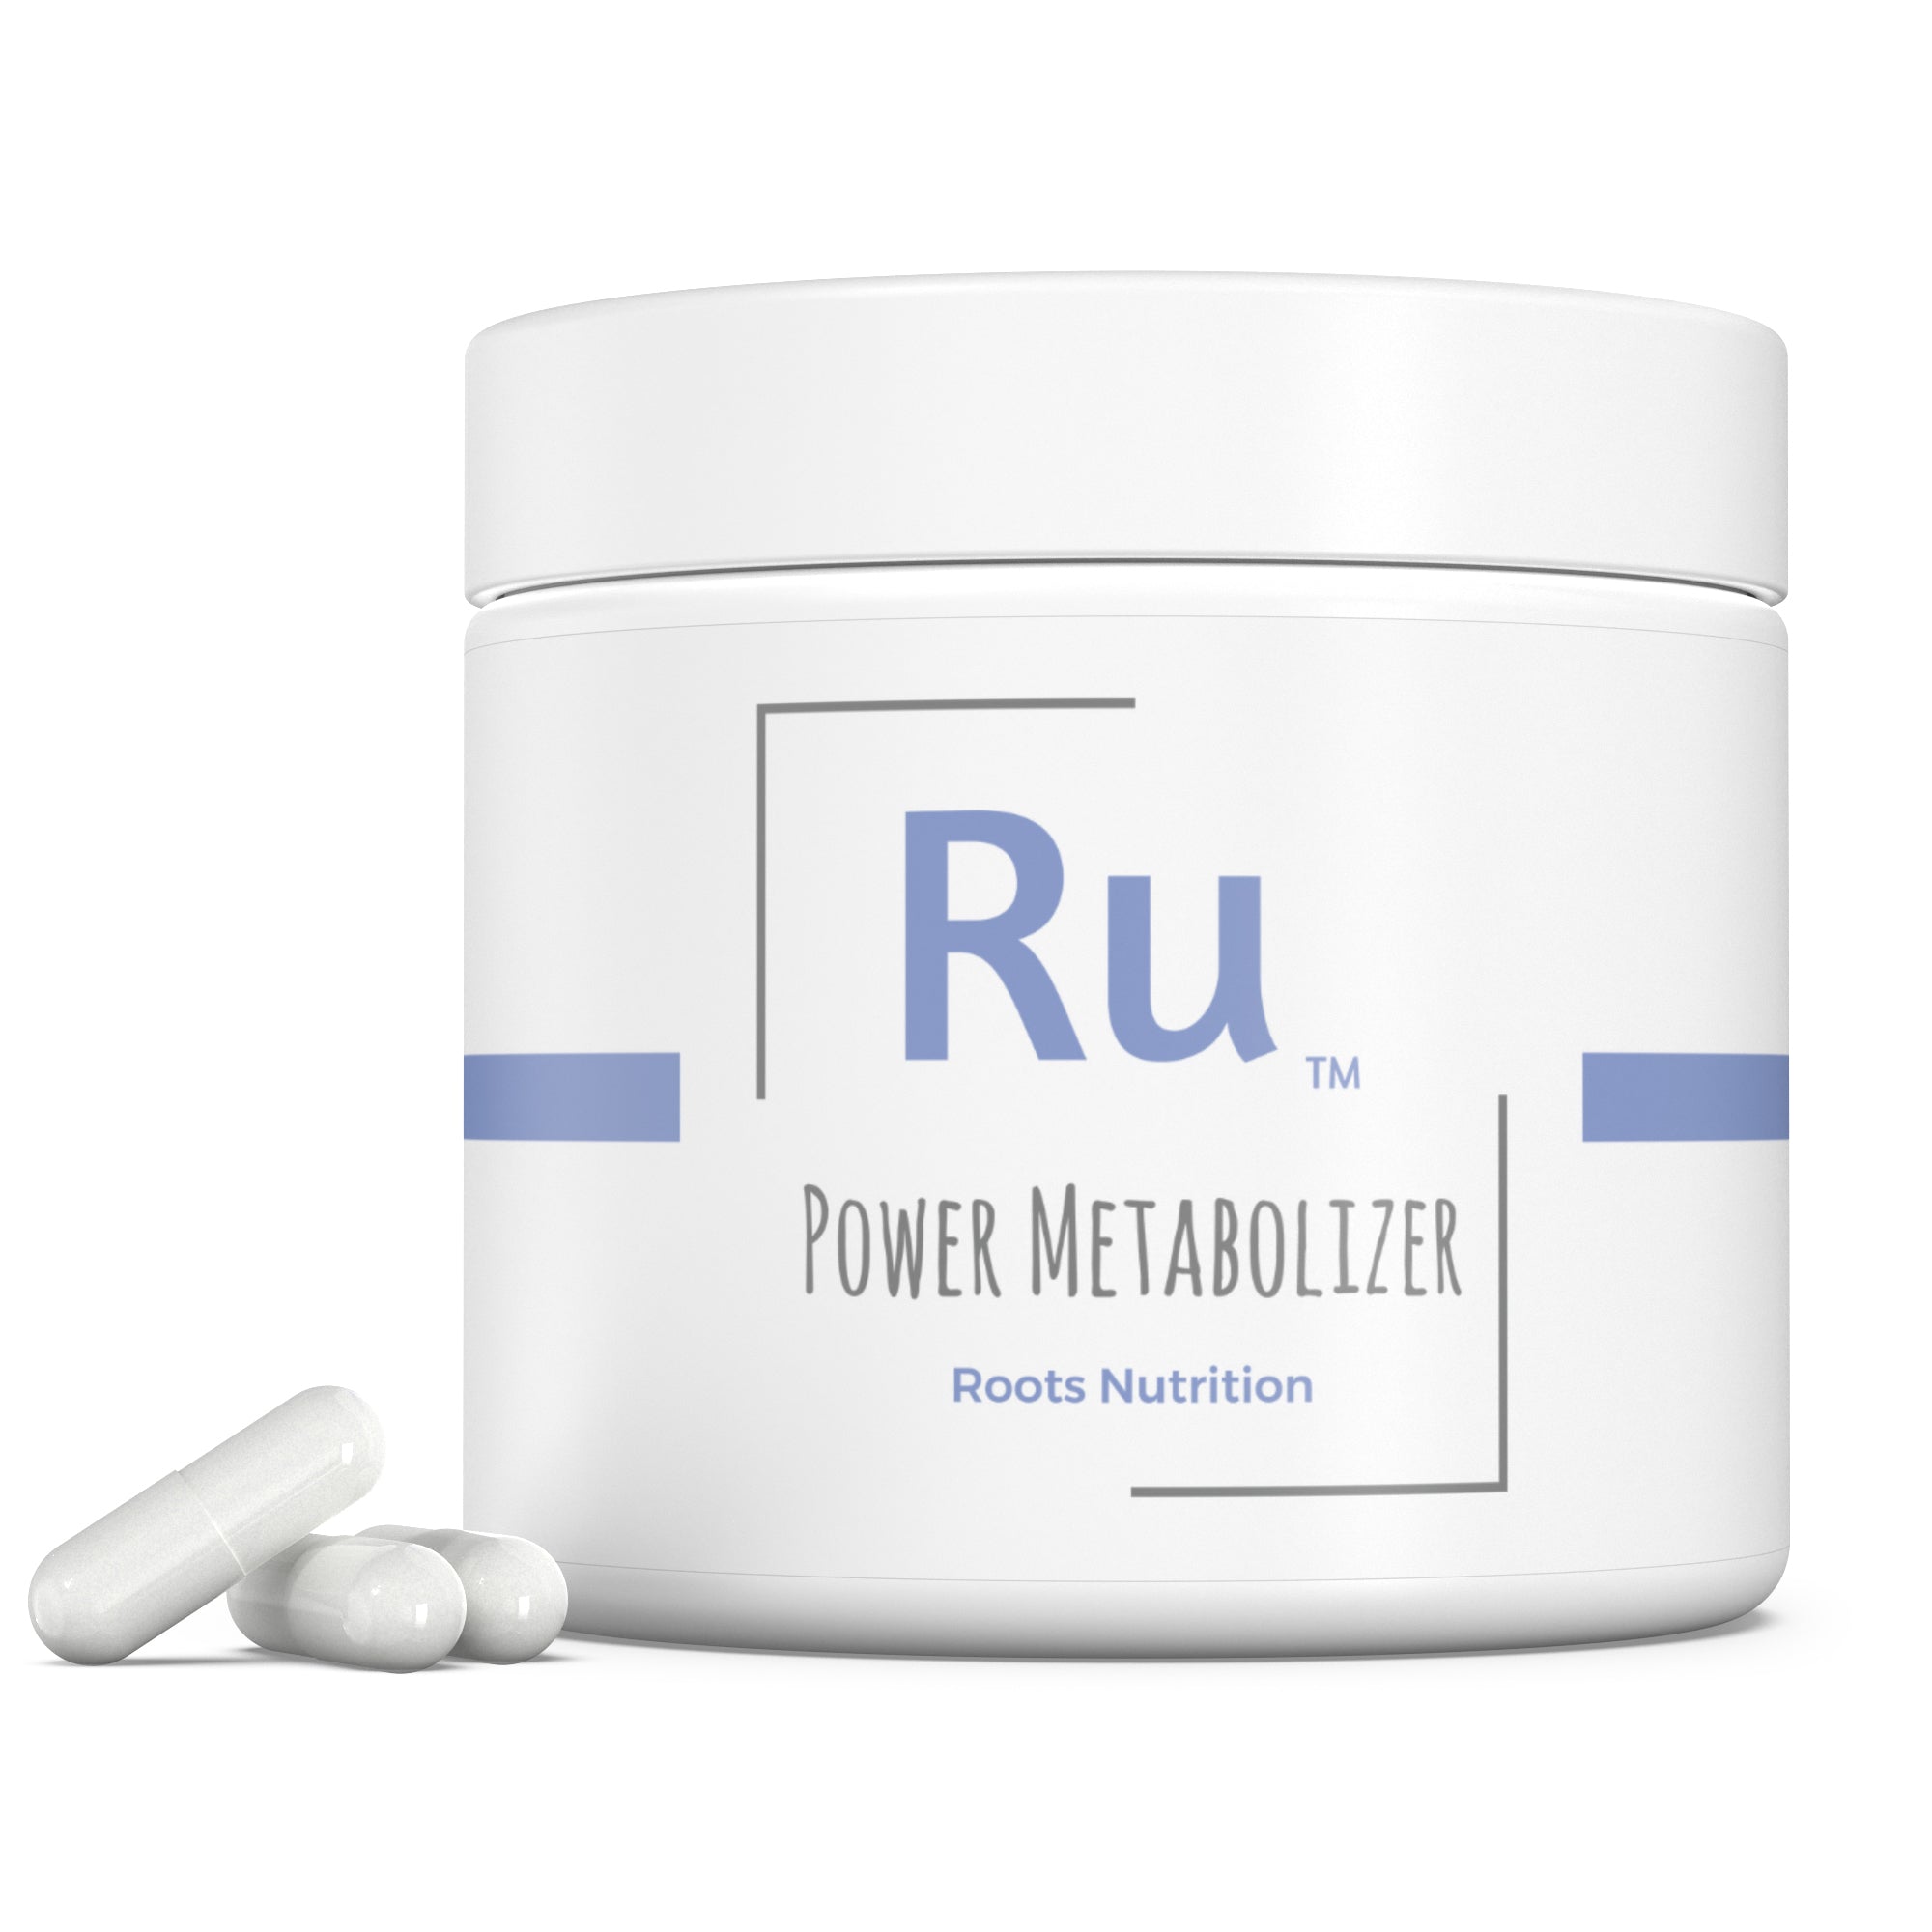 Power Metabolizer Capsules: Boost Metabolism Naturally